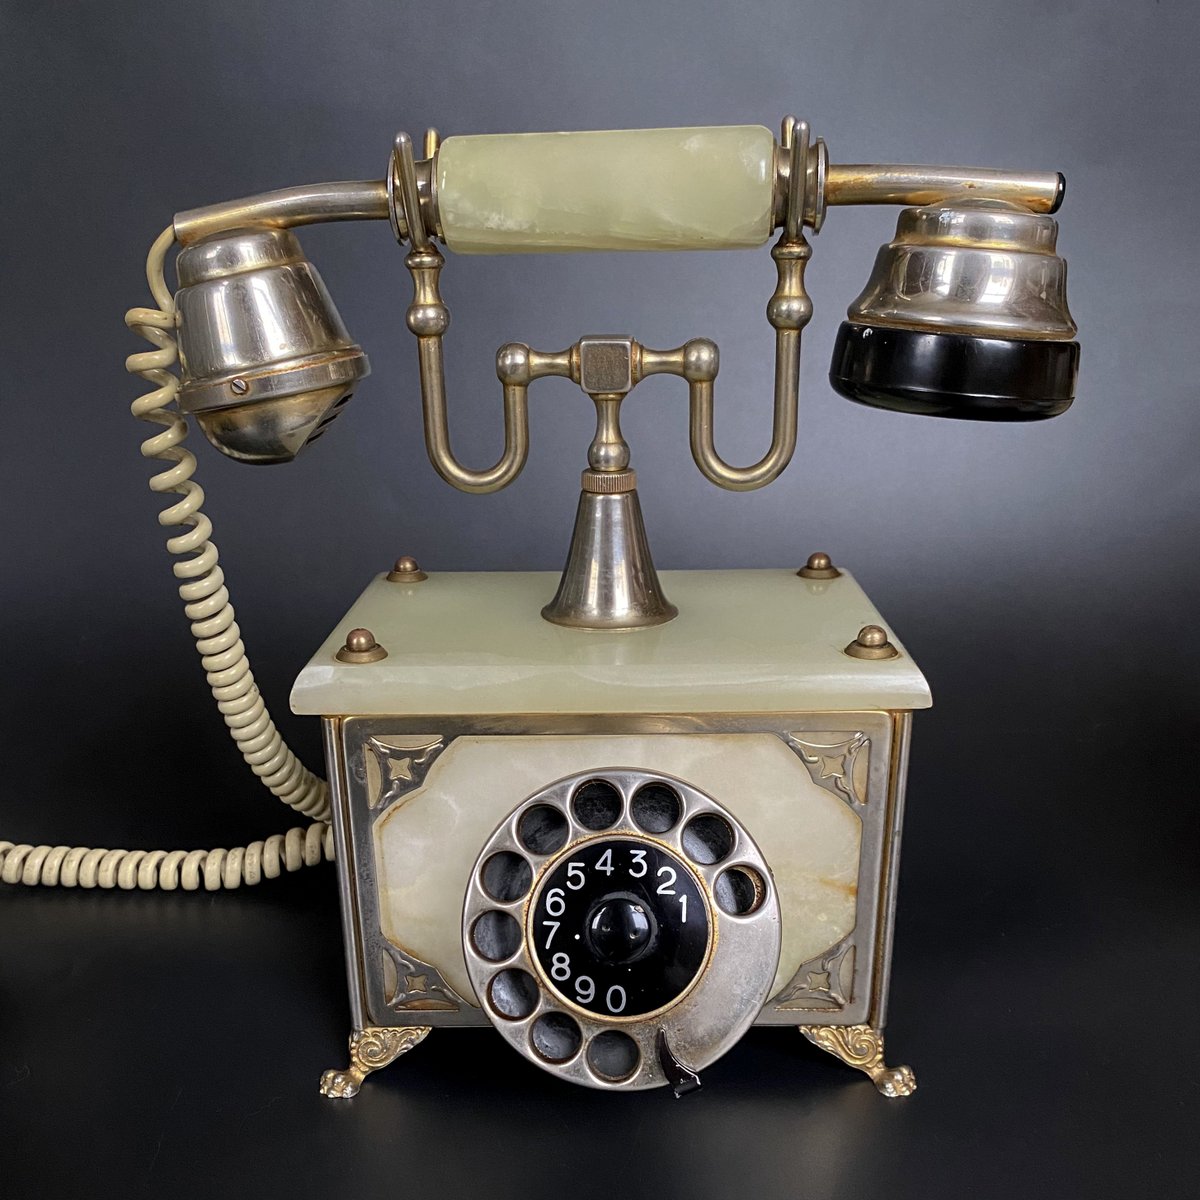 This is one I haven't listed yet - a totally OTT vintage telephone. I believe it's a '60s or '70s reproduction of a '30s model. Light green onyx with a metal casing. I'm told it still works, but I haven't tested it yet... #vintageshowandsell #VintageCollectibles #vintagephone